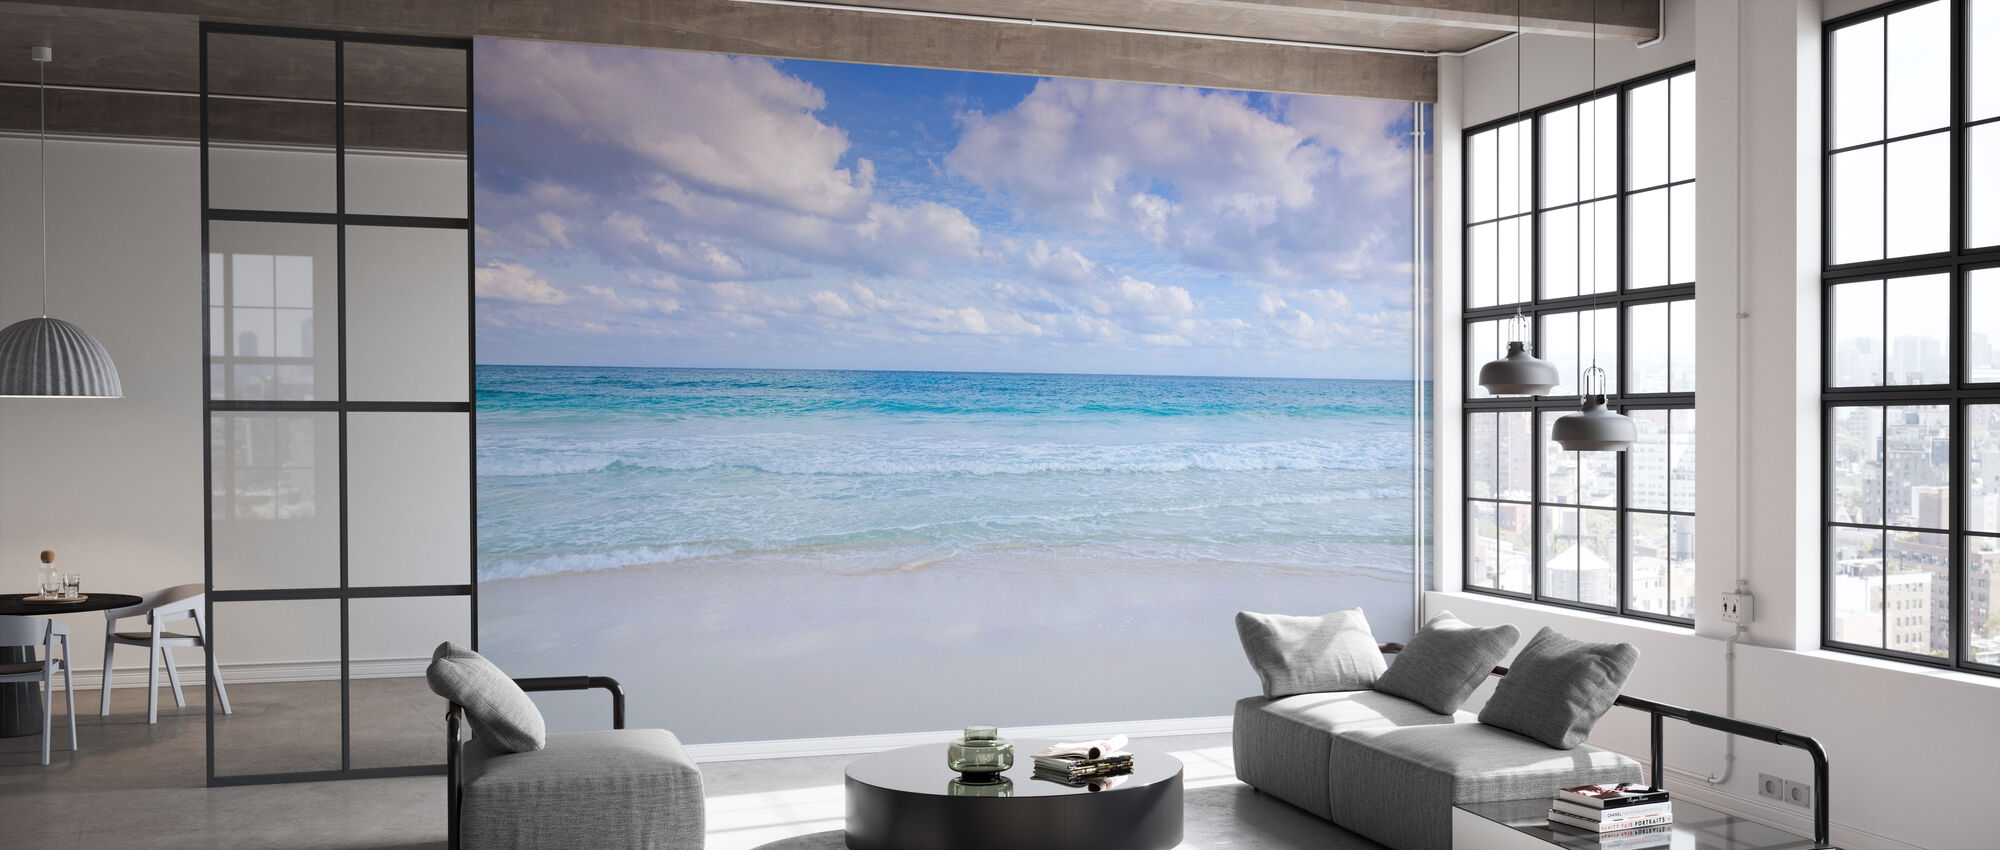 canvas prints from photowall a large photo wall of an ocean scene in a living room with dining room in background